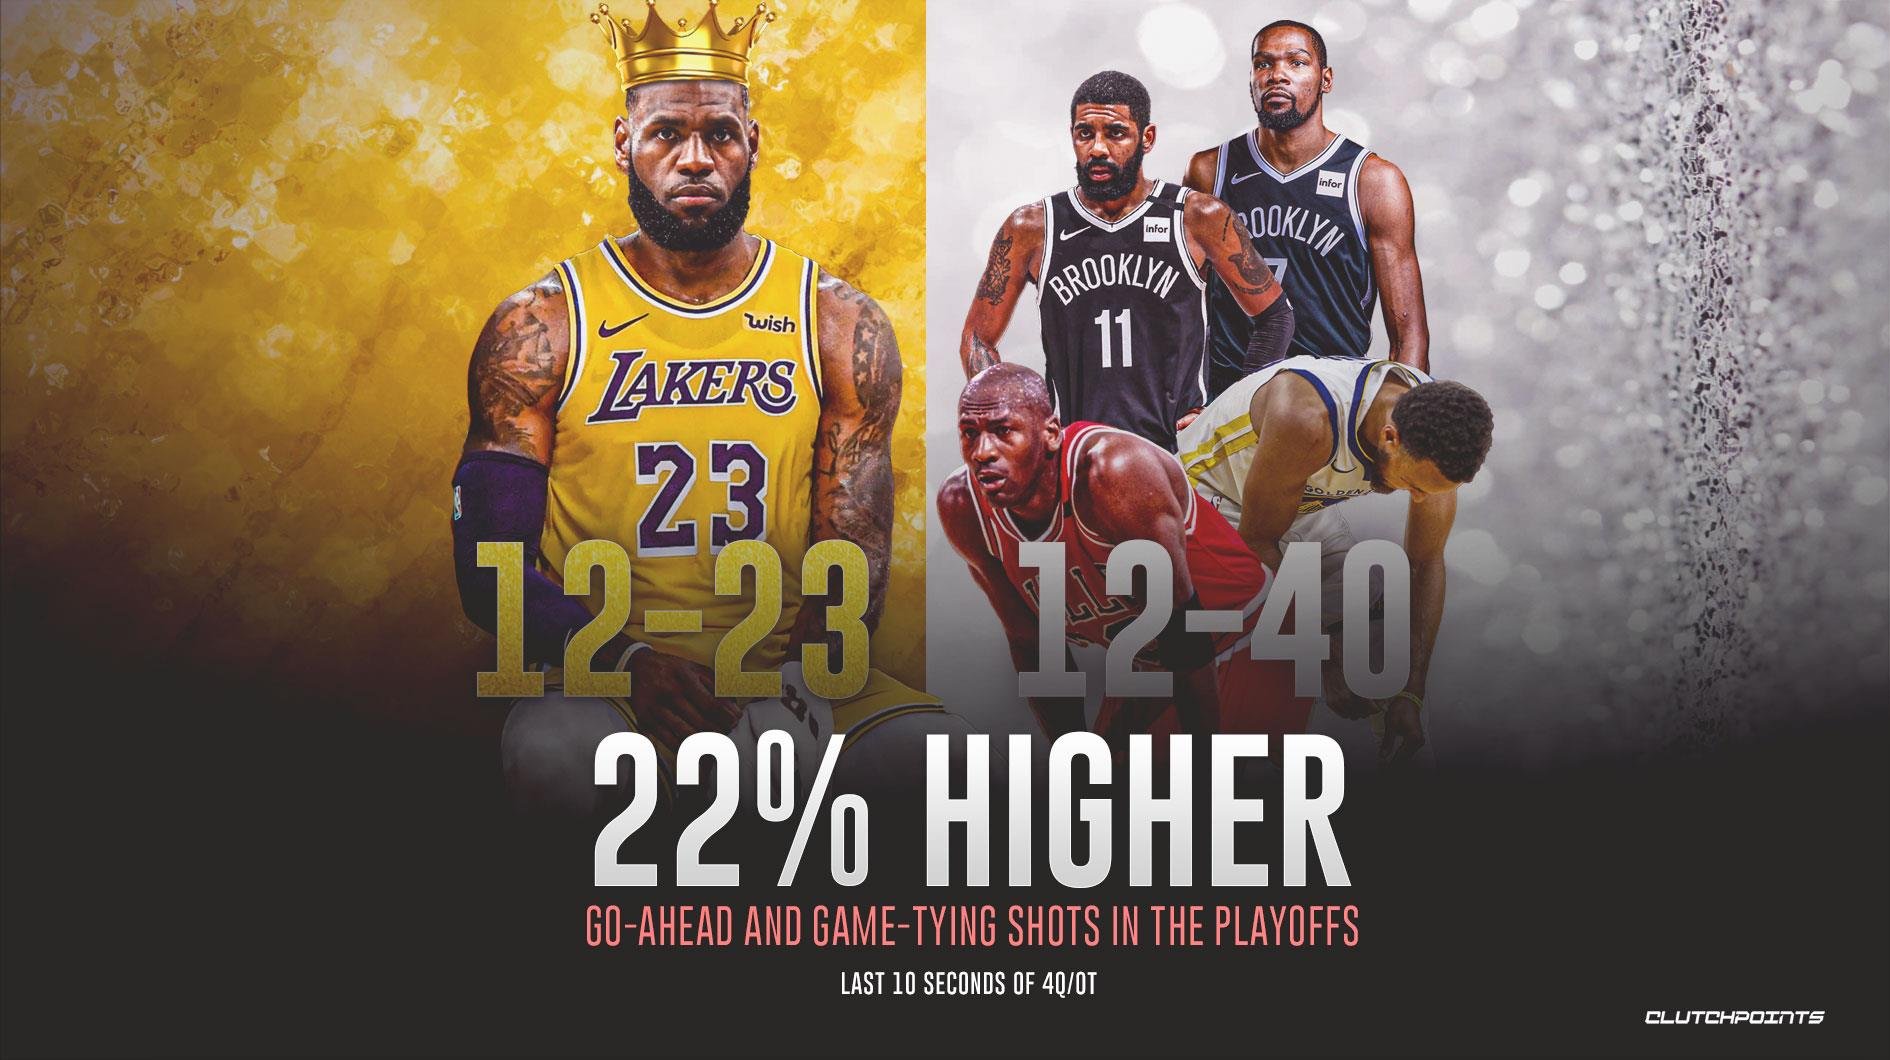 ClutchPoints on X: The Nets and Lakers rosters aren't perfect, but they  appear to be the clear favorites to reach the NBA Finals. Can anyone take  down LeBron or Kevin Durant's teams?